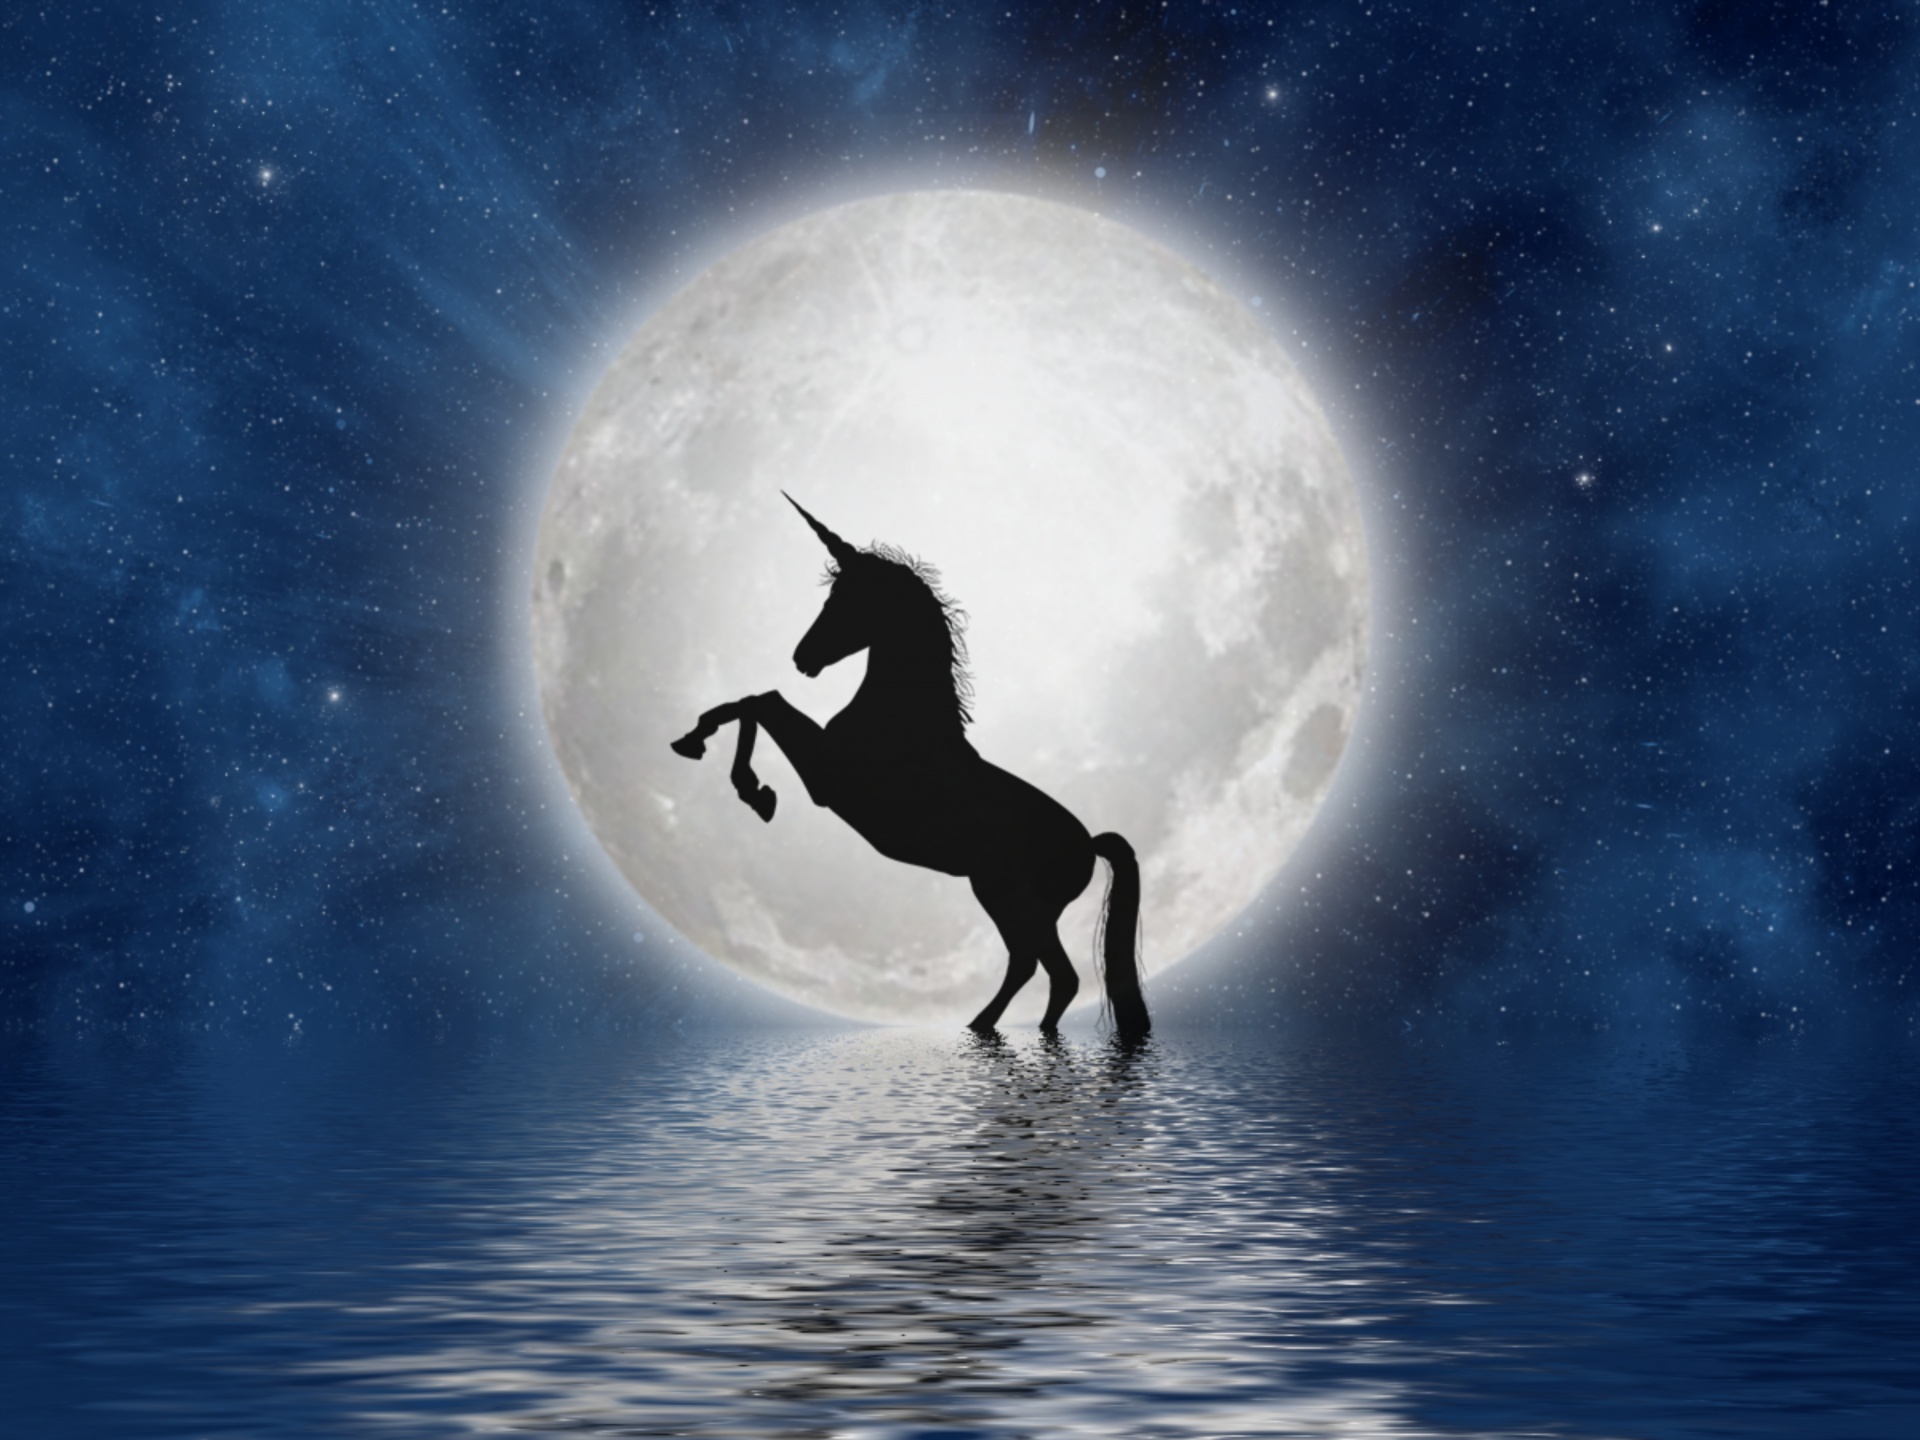 A silhouette of a unicorn, standing on its rear legs, in some water. A giant full moon in the background reflects on the water below.